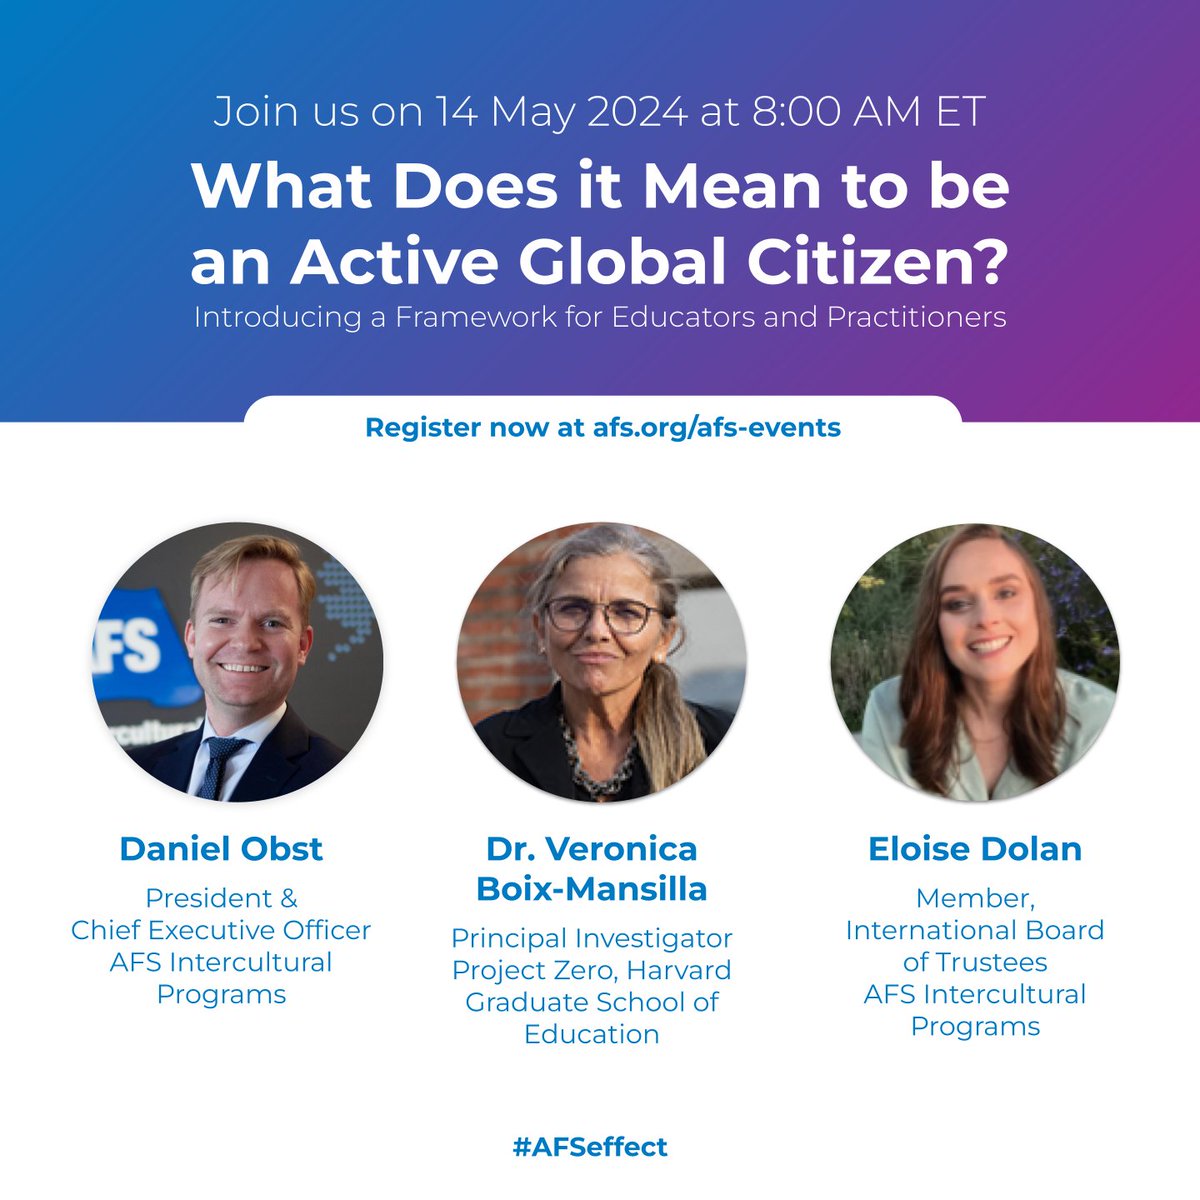 Mark your calendar! On May 14 discover the AFS Framework for Active Global Citizenship. @dtobst @VBoixMansilla and@Elowheeze will discuss our definition of Active Global Citizenship and its underlying educational principles. afs.org/afs-events/#af… #AFSeffect #education